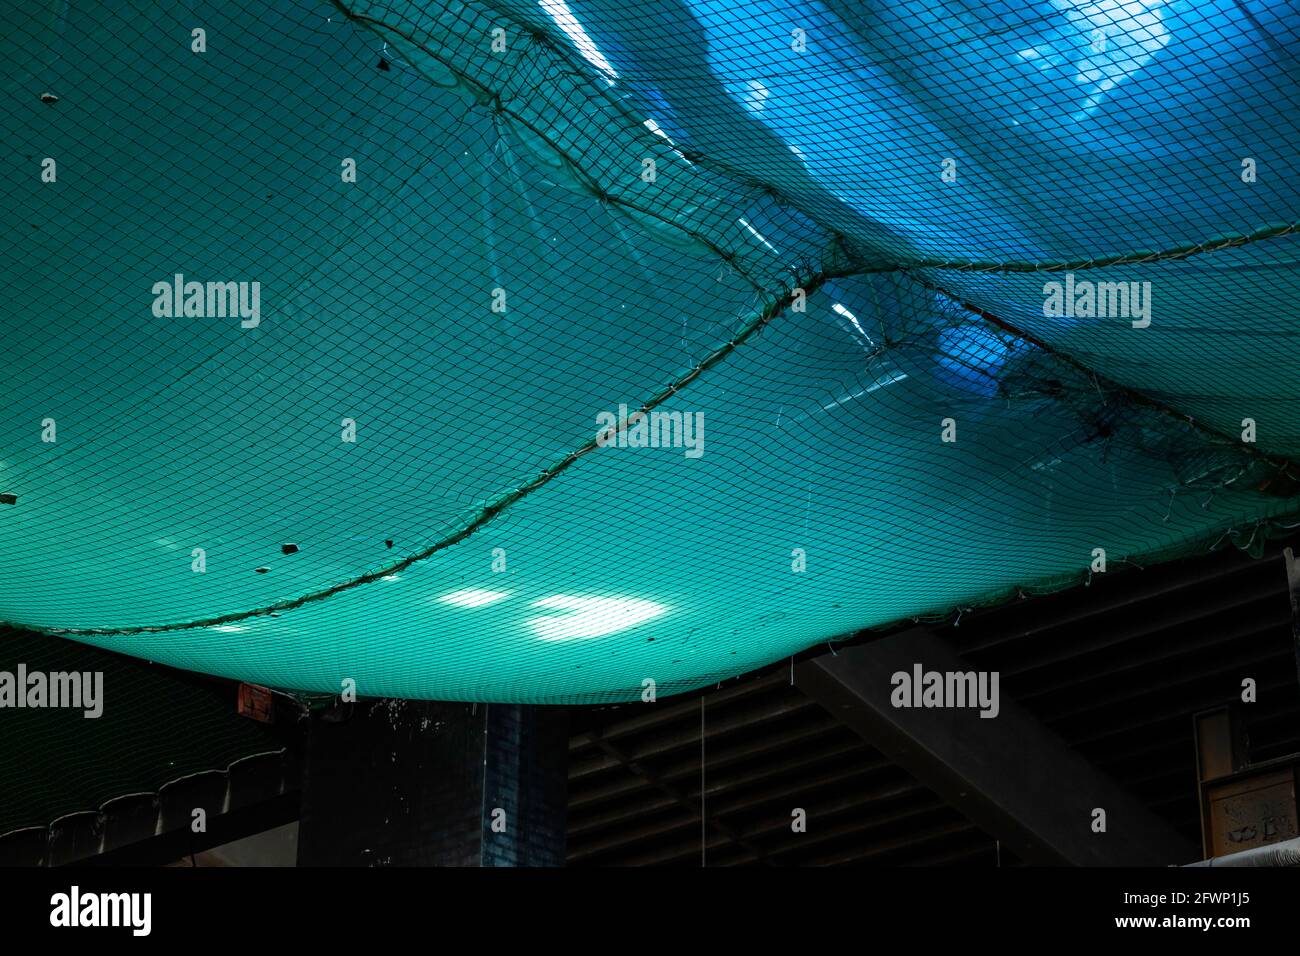 a regulatory safety net of color green, placed under roof to prevent the risk of falls during the works Stock Photo